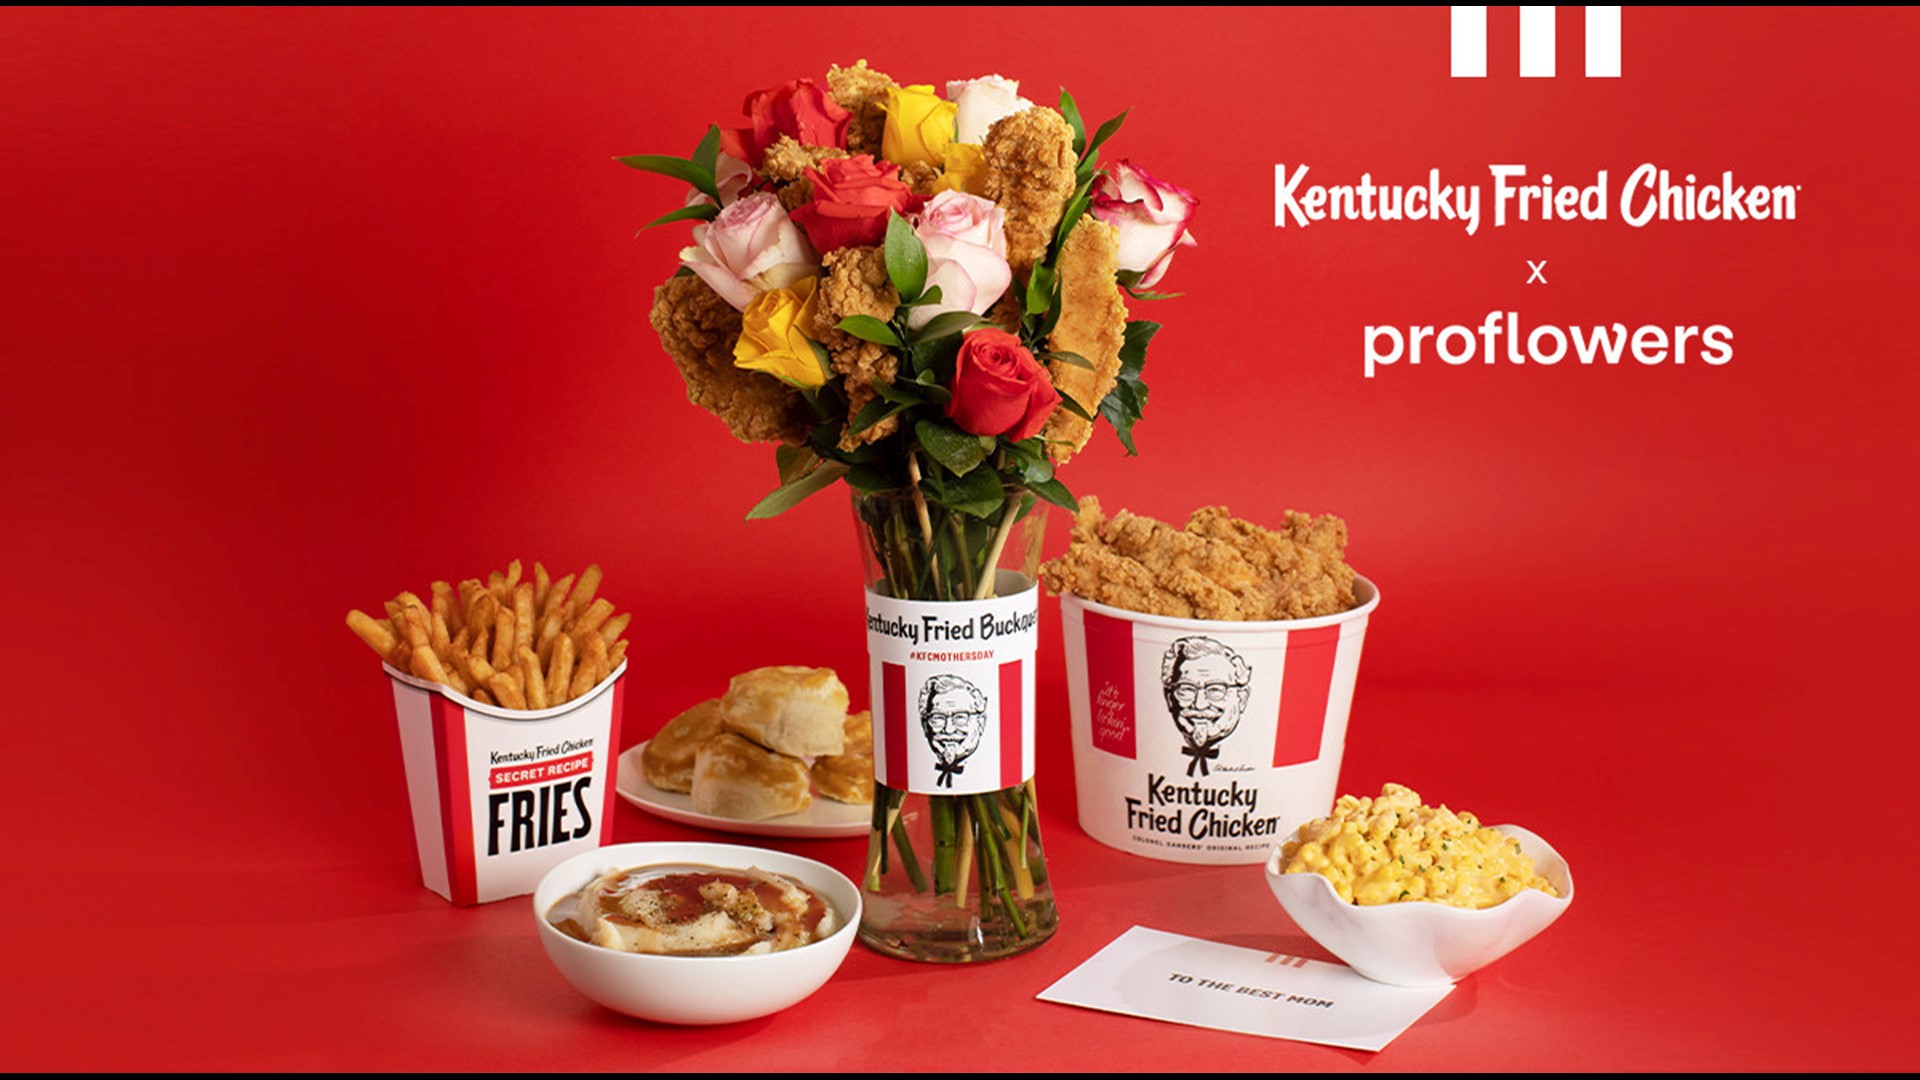 If you're searching for that perfect Mother's Day gift, you can stop now. Your likely best option is outlined below and available from Kentucky Fried Chicken.